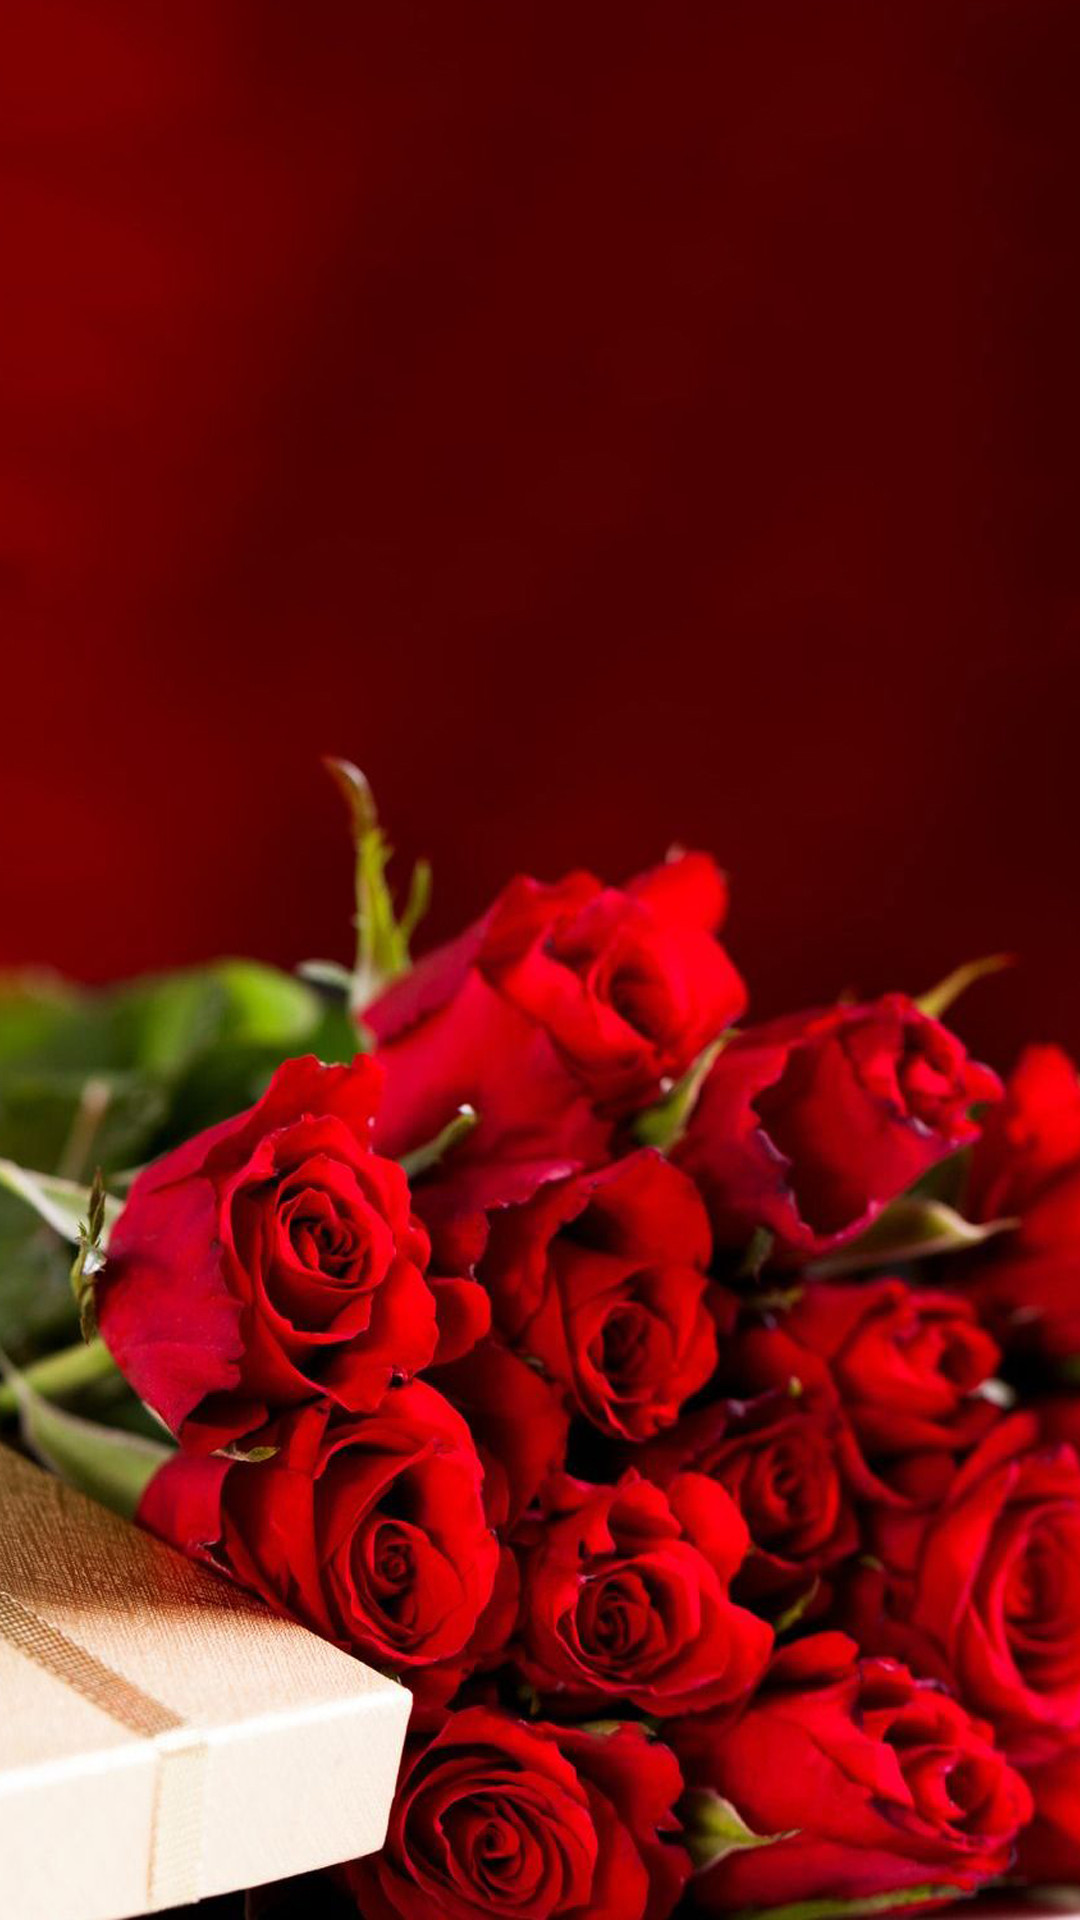 1080x1920, Red Roses Bouquet Valentines Day Gift Android - Roses Bouquet - HD Wallpaper 